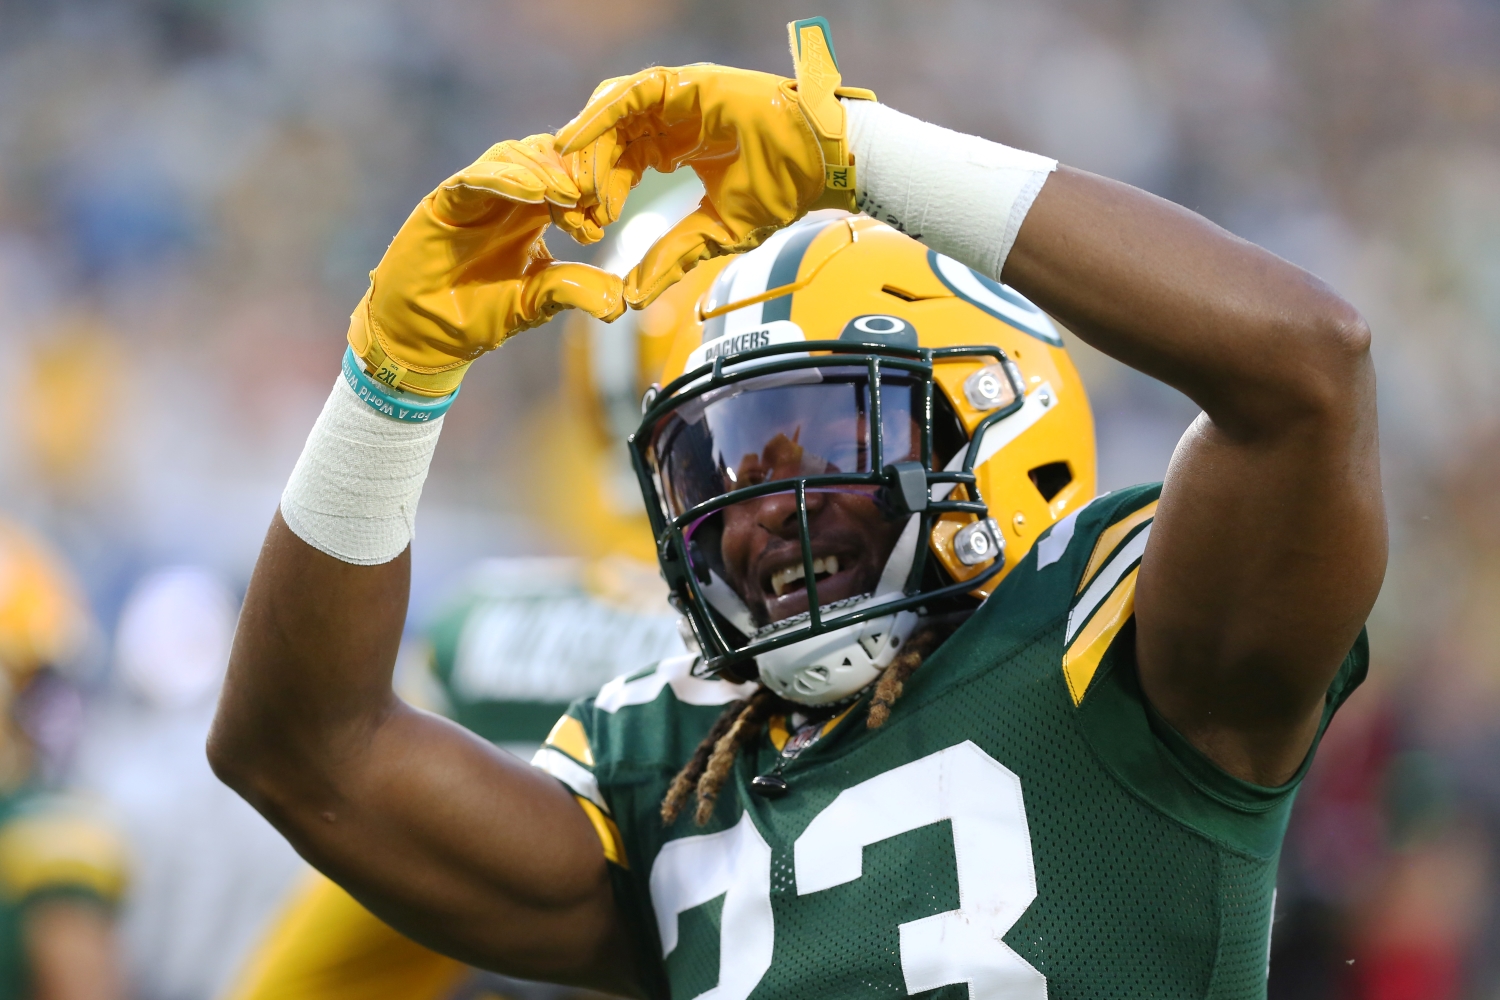 Aaron Jones makes a heart sign for a fan prior to a game between the Green Bay Packers and the Detroit Lions.